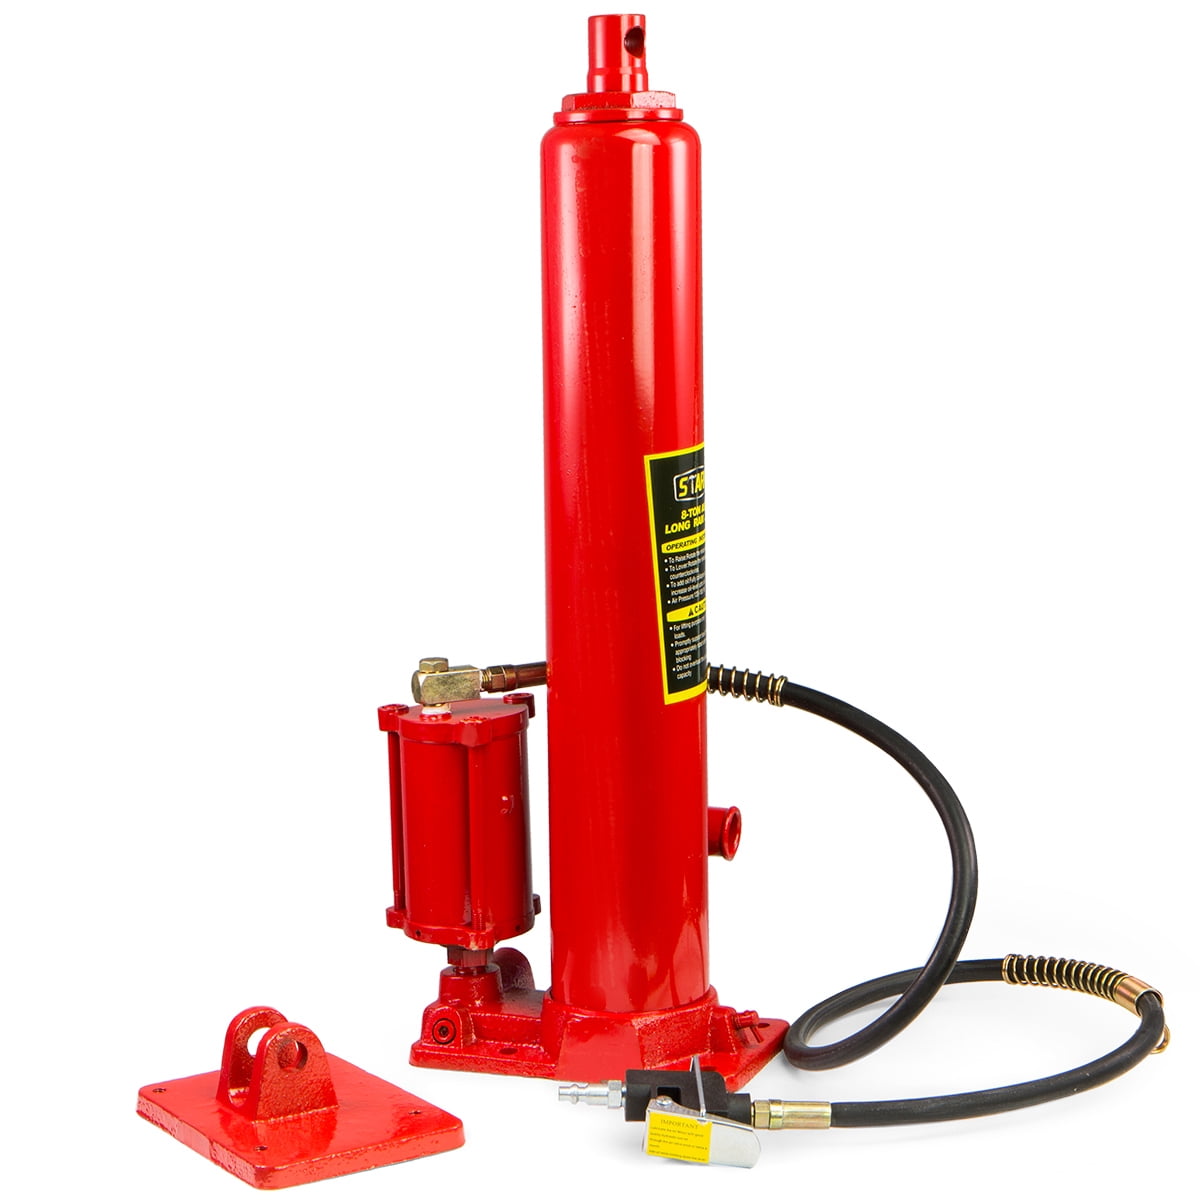 Torin T30806 Big Red Long Ram Hydraulic Jack for sale online 